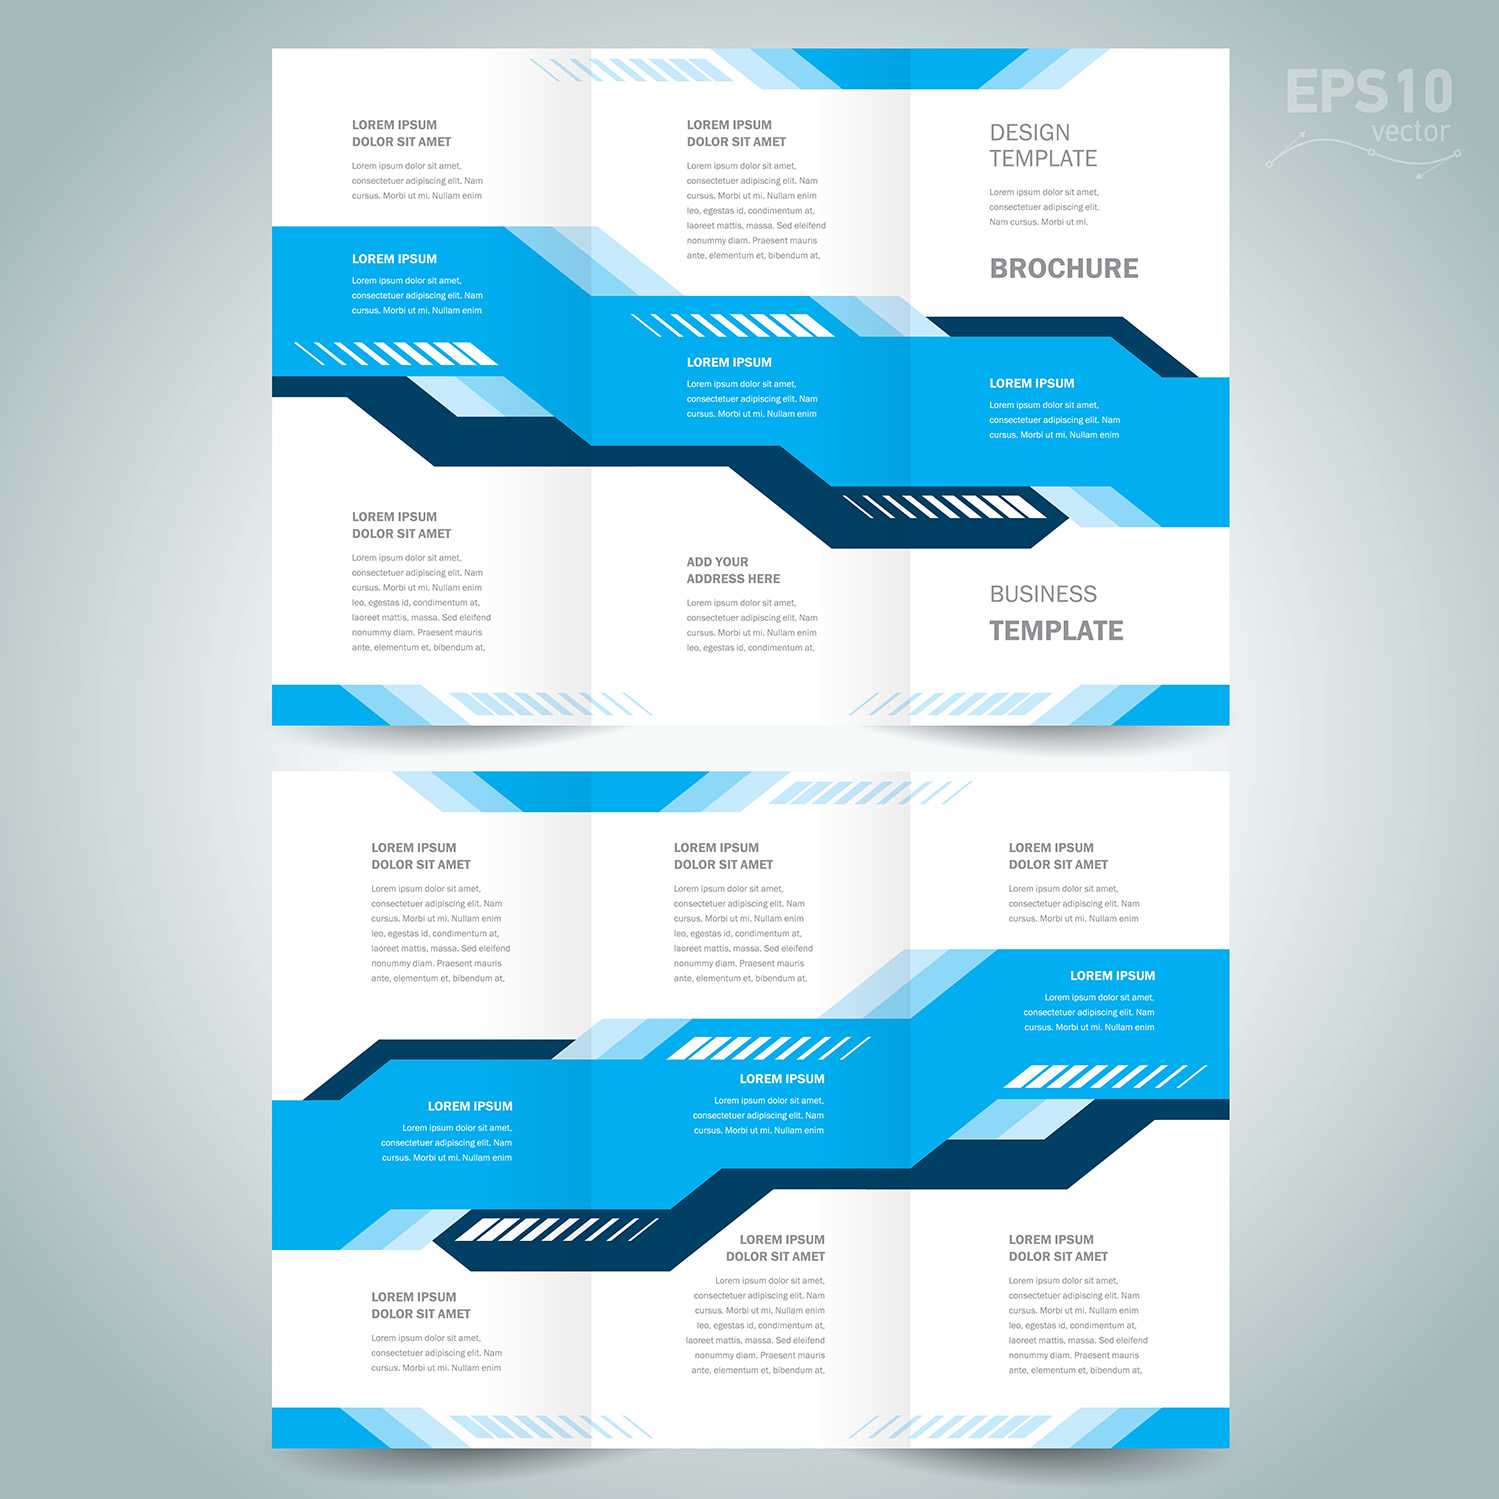 Elegant, Professional, Training Flyer Design For A Company Pertaining To Training Brochure Template